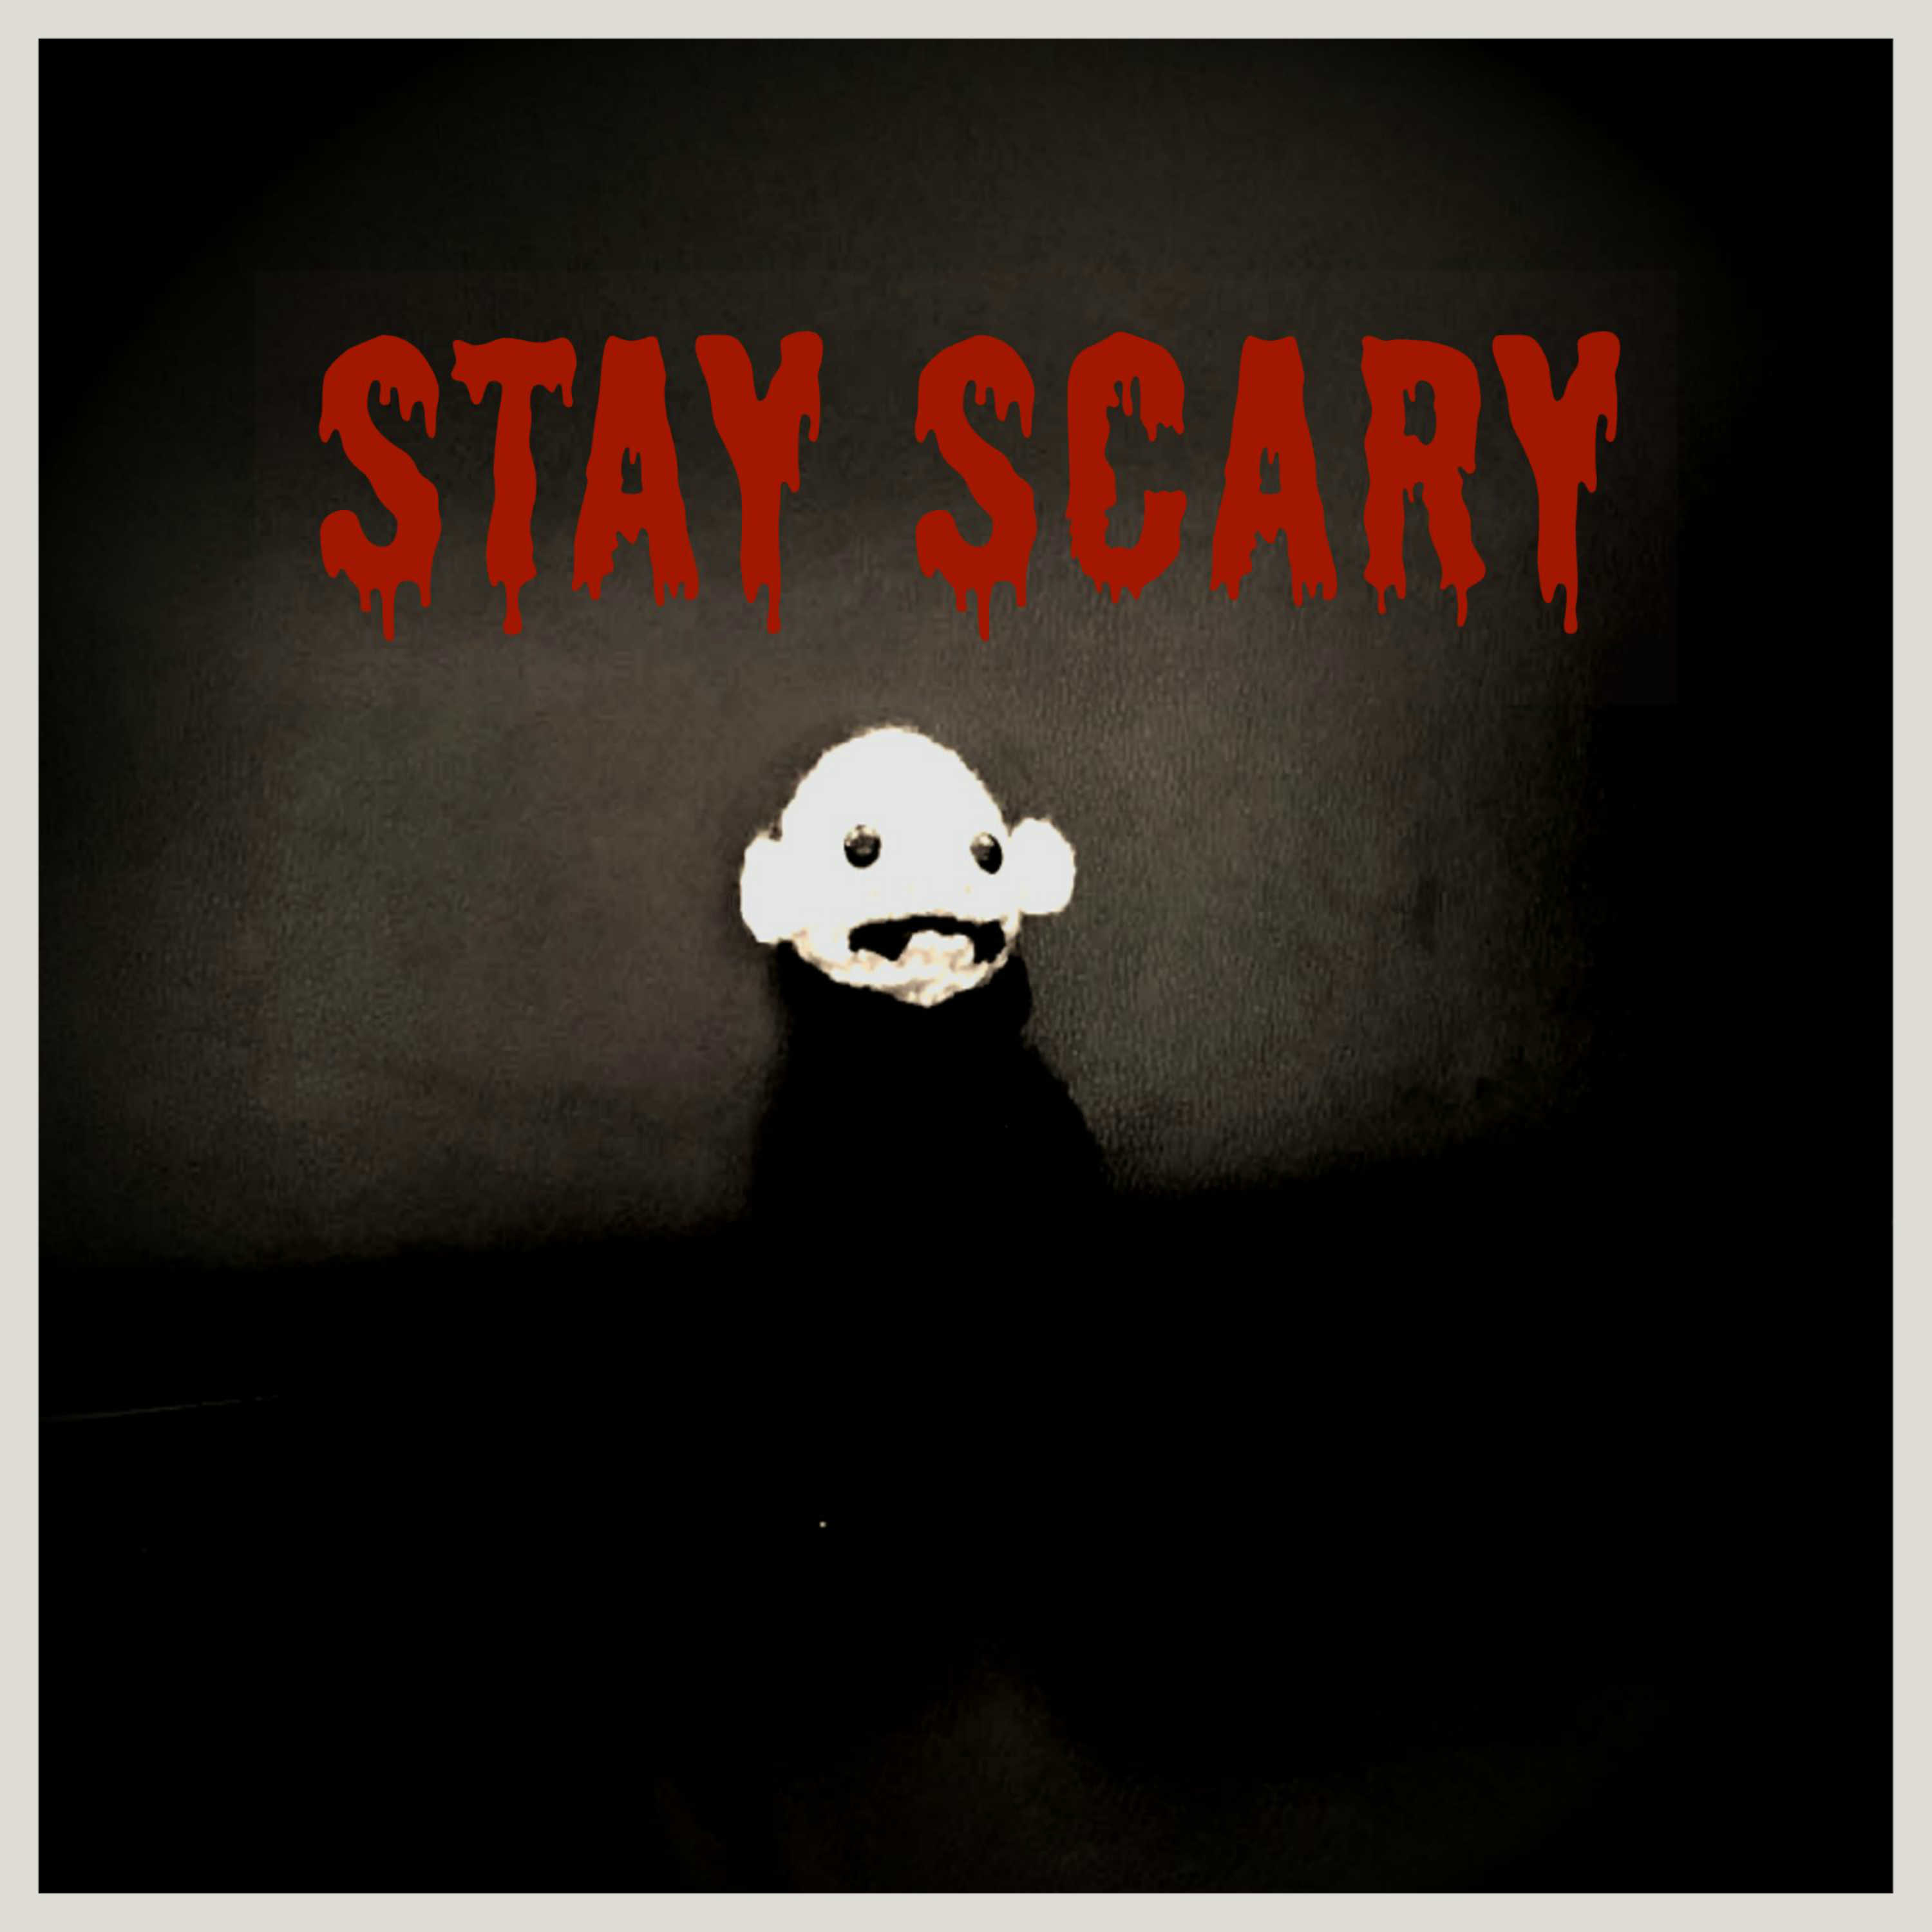 Stay Scary